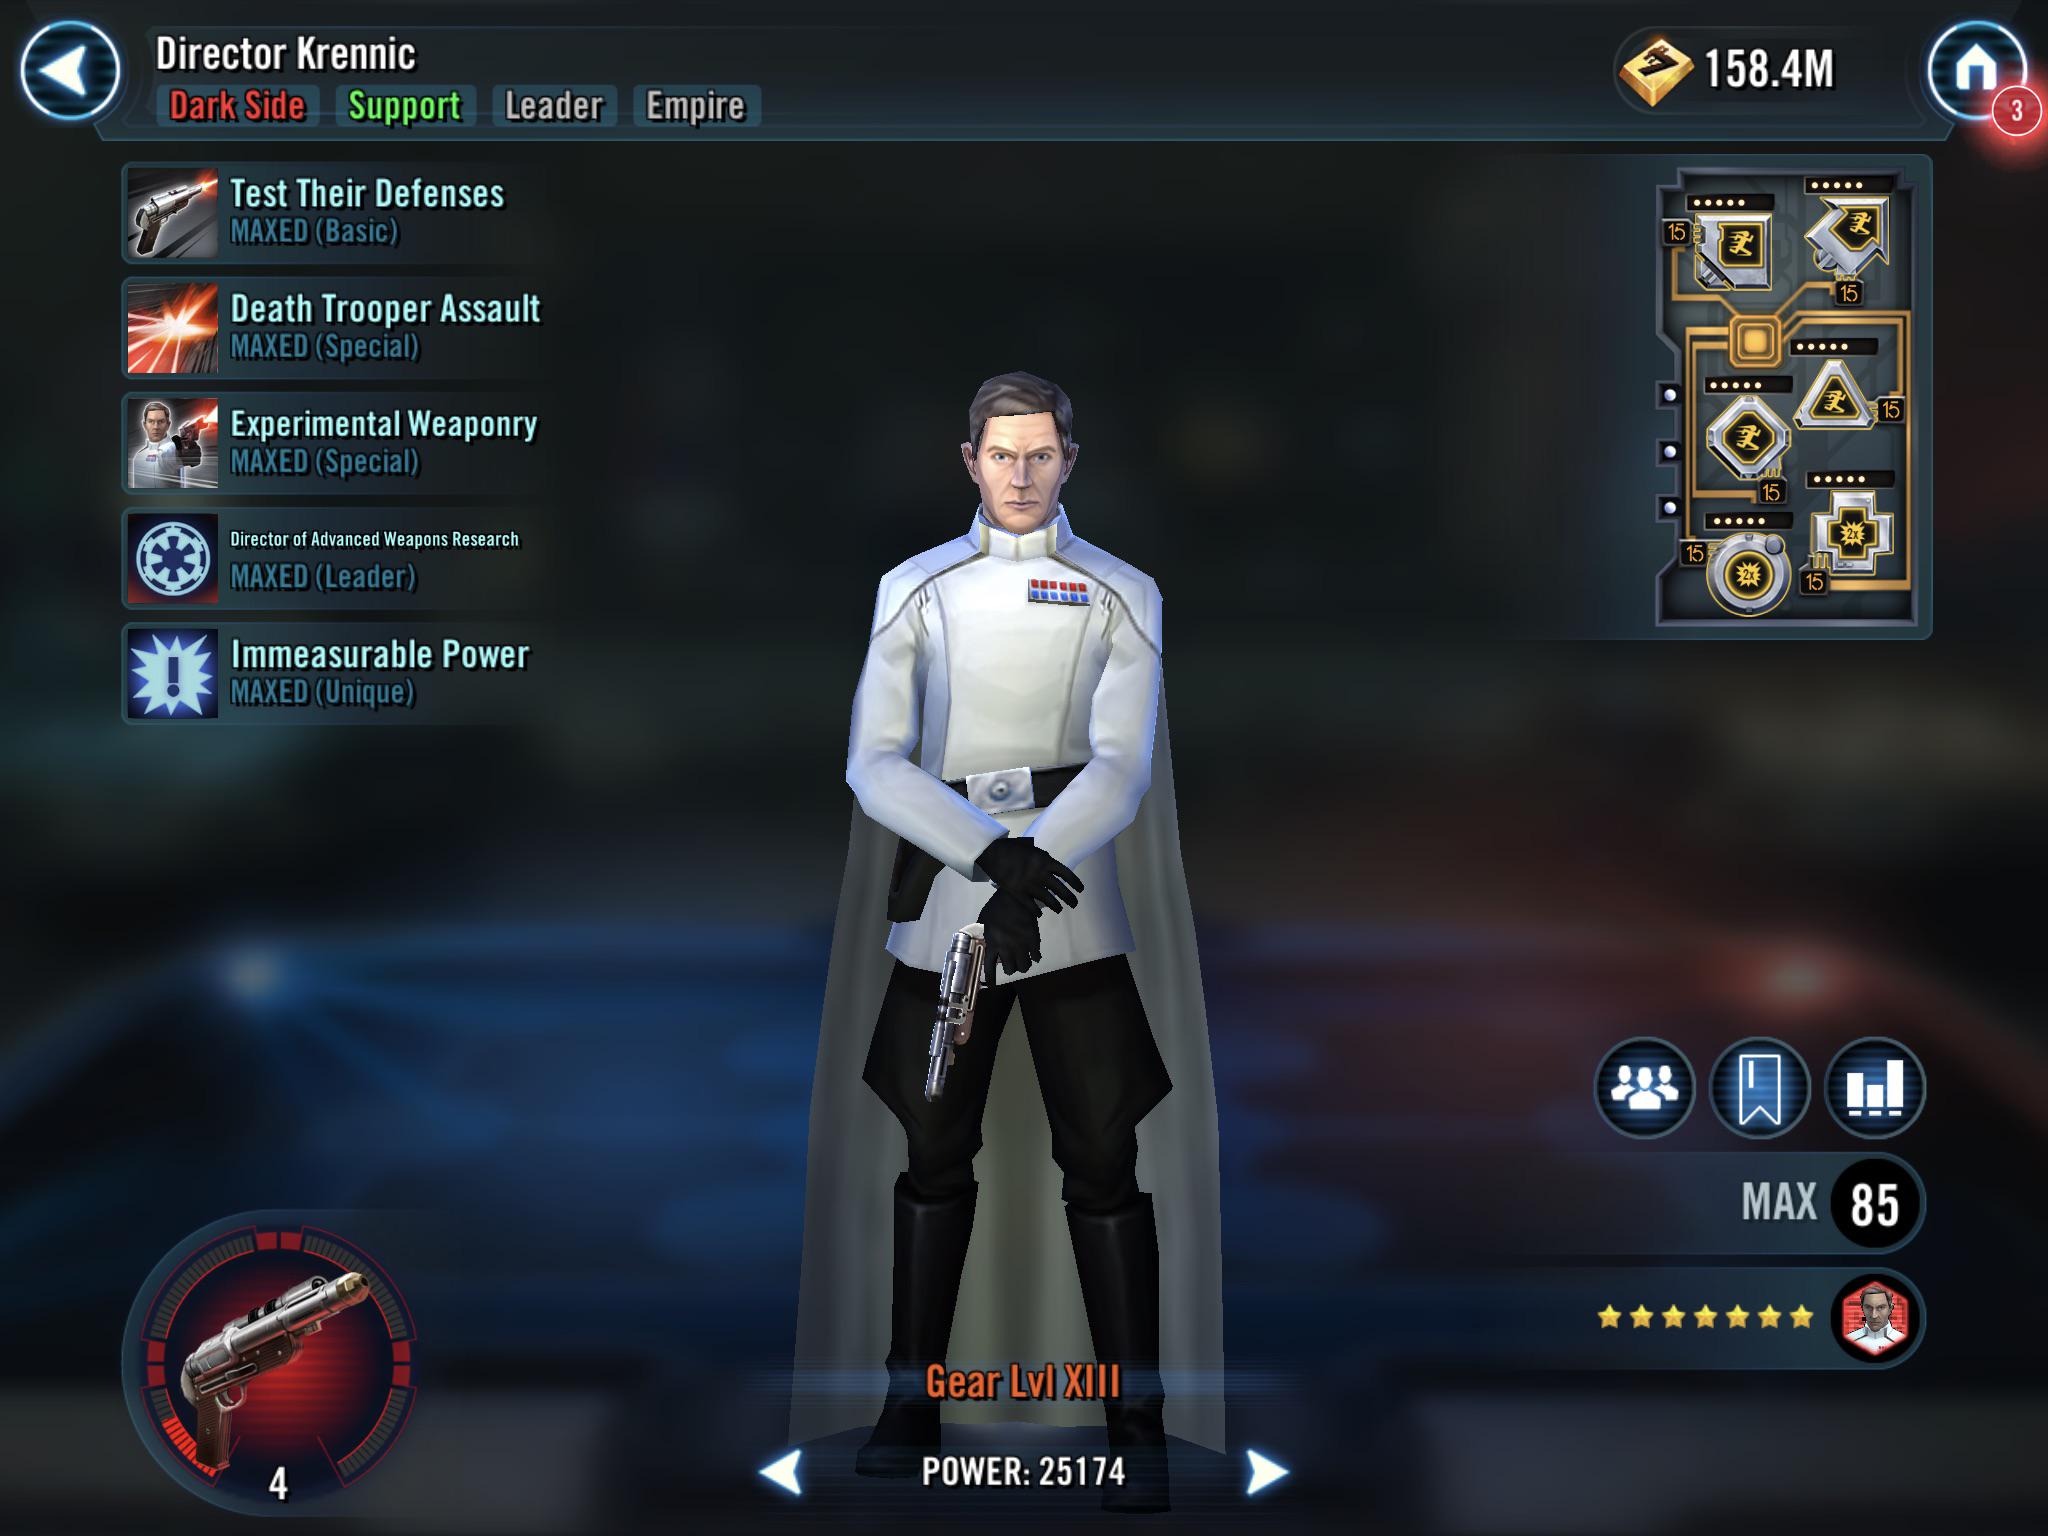 Can I play as Director Krennic in any Star Wars games?